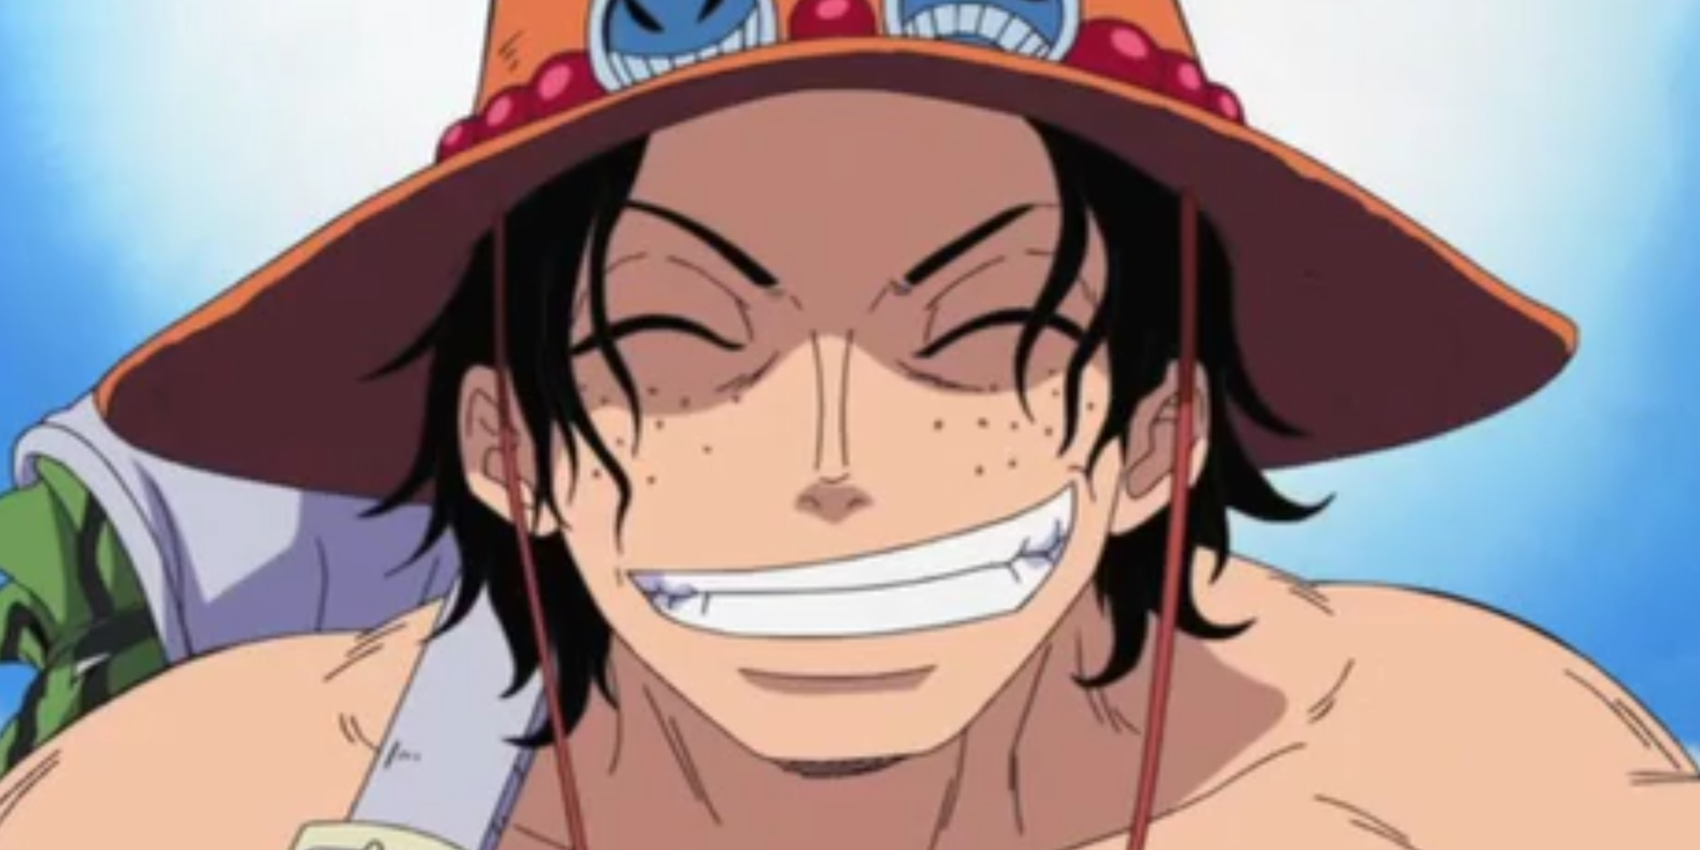 Ace grinning from one piece